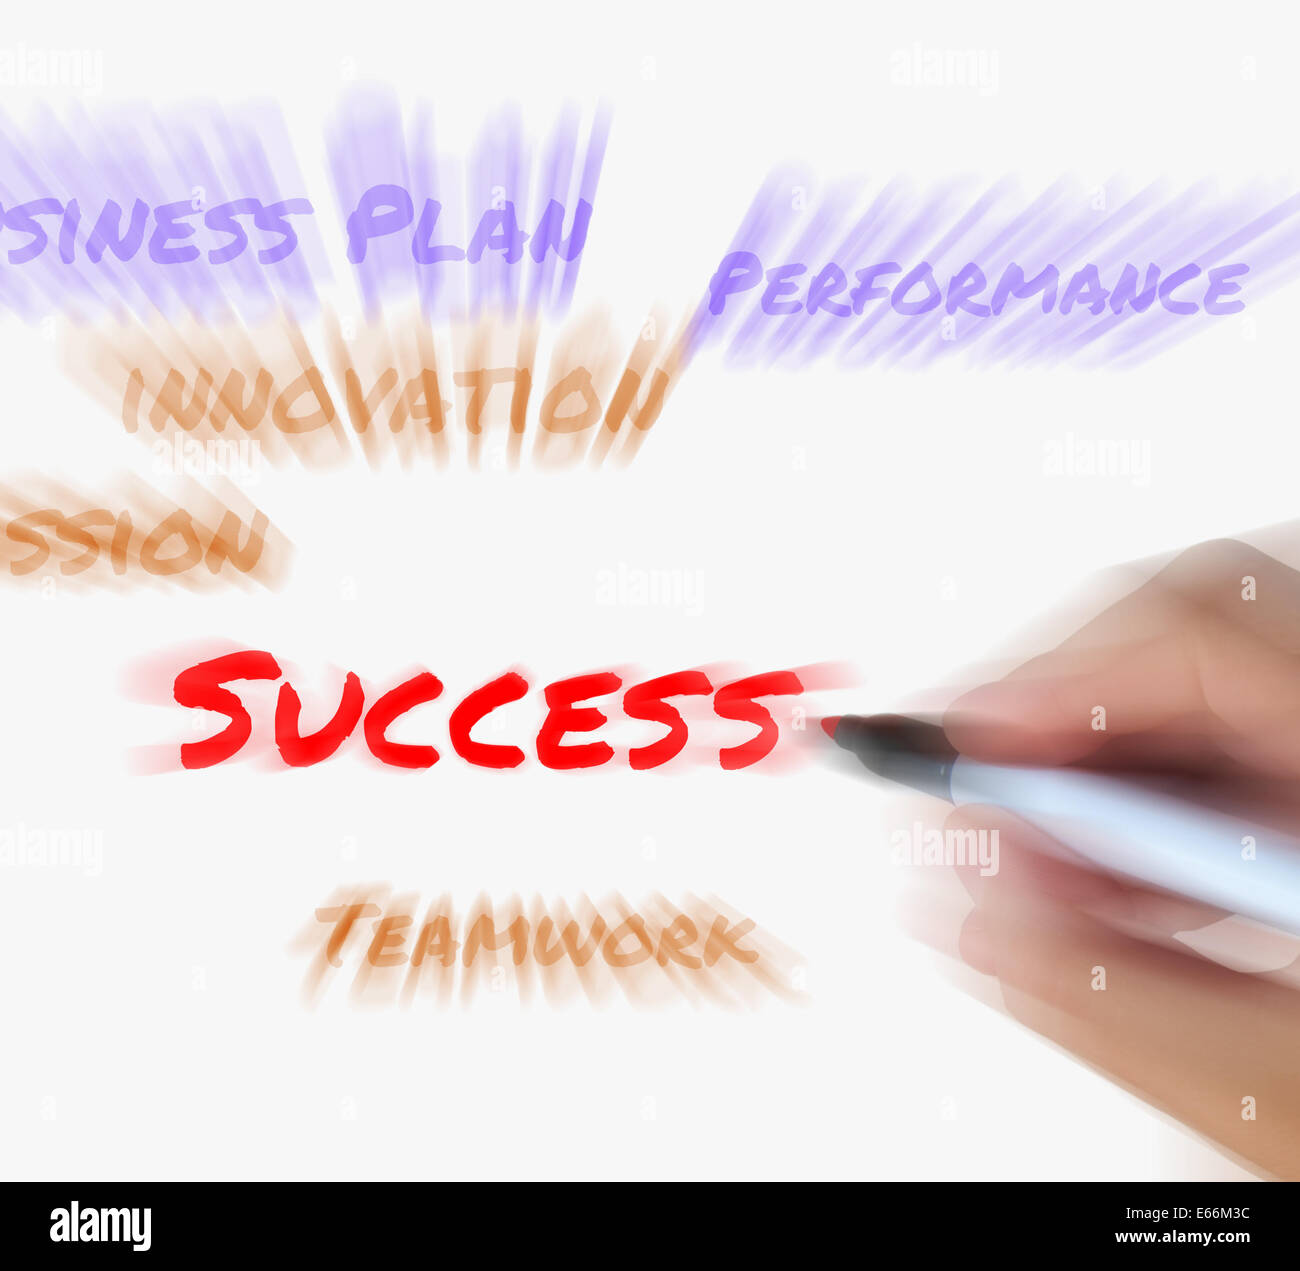 Success on whiteboard Displaying Successful Solutions and Accomplishment Stock Photo